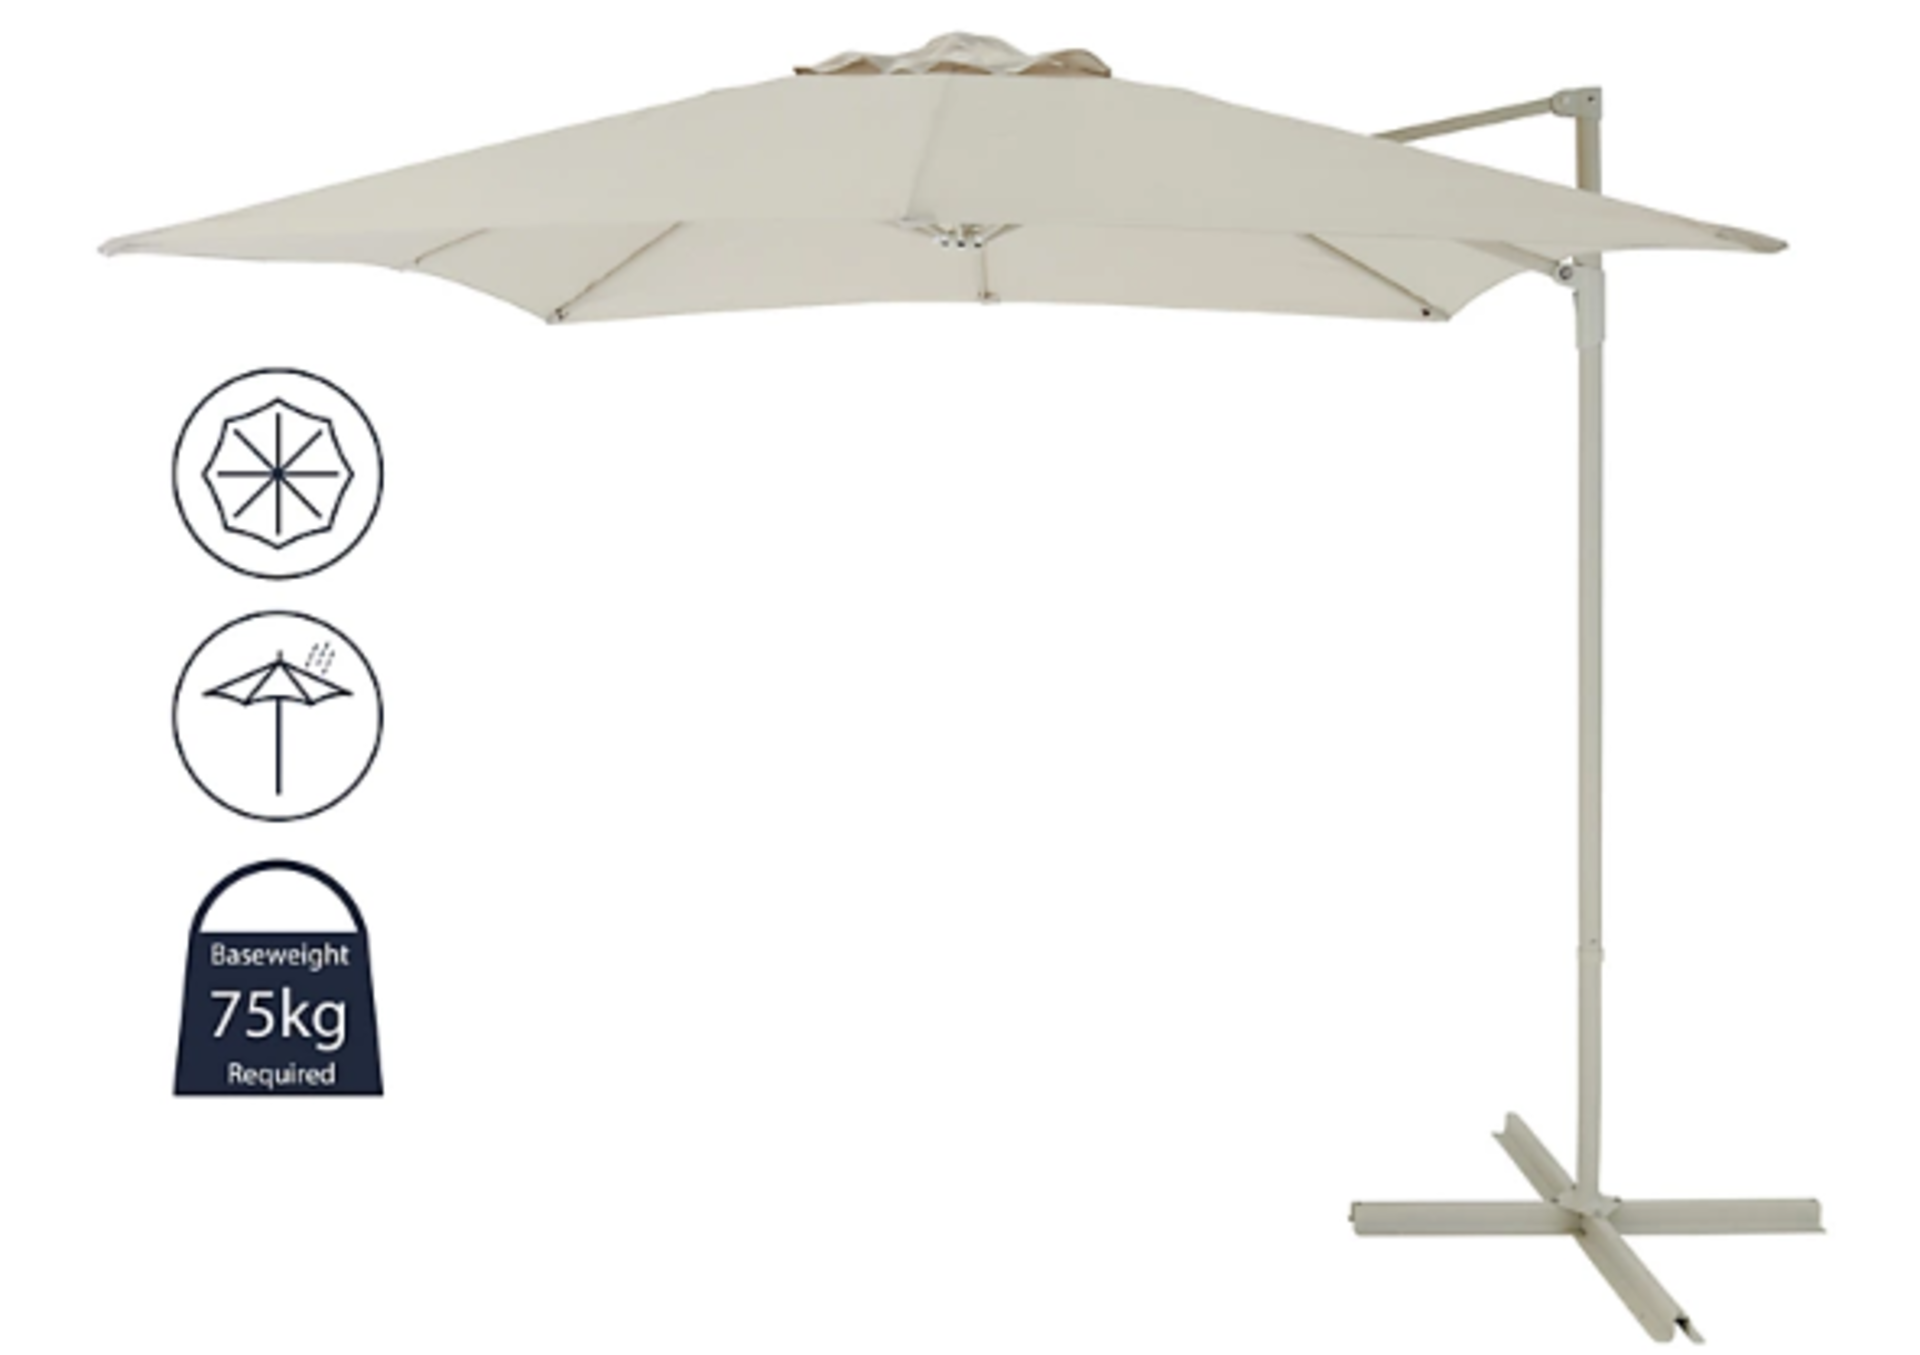 TRADE LOT 4 x New & Boxed Luxury 2.5m Sand Overhanging Parasols - Sand. This square overhanging - Image 7 of 8